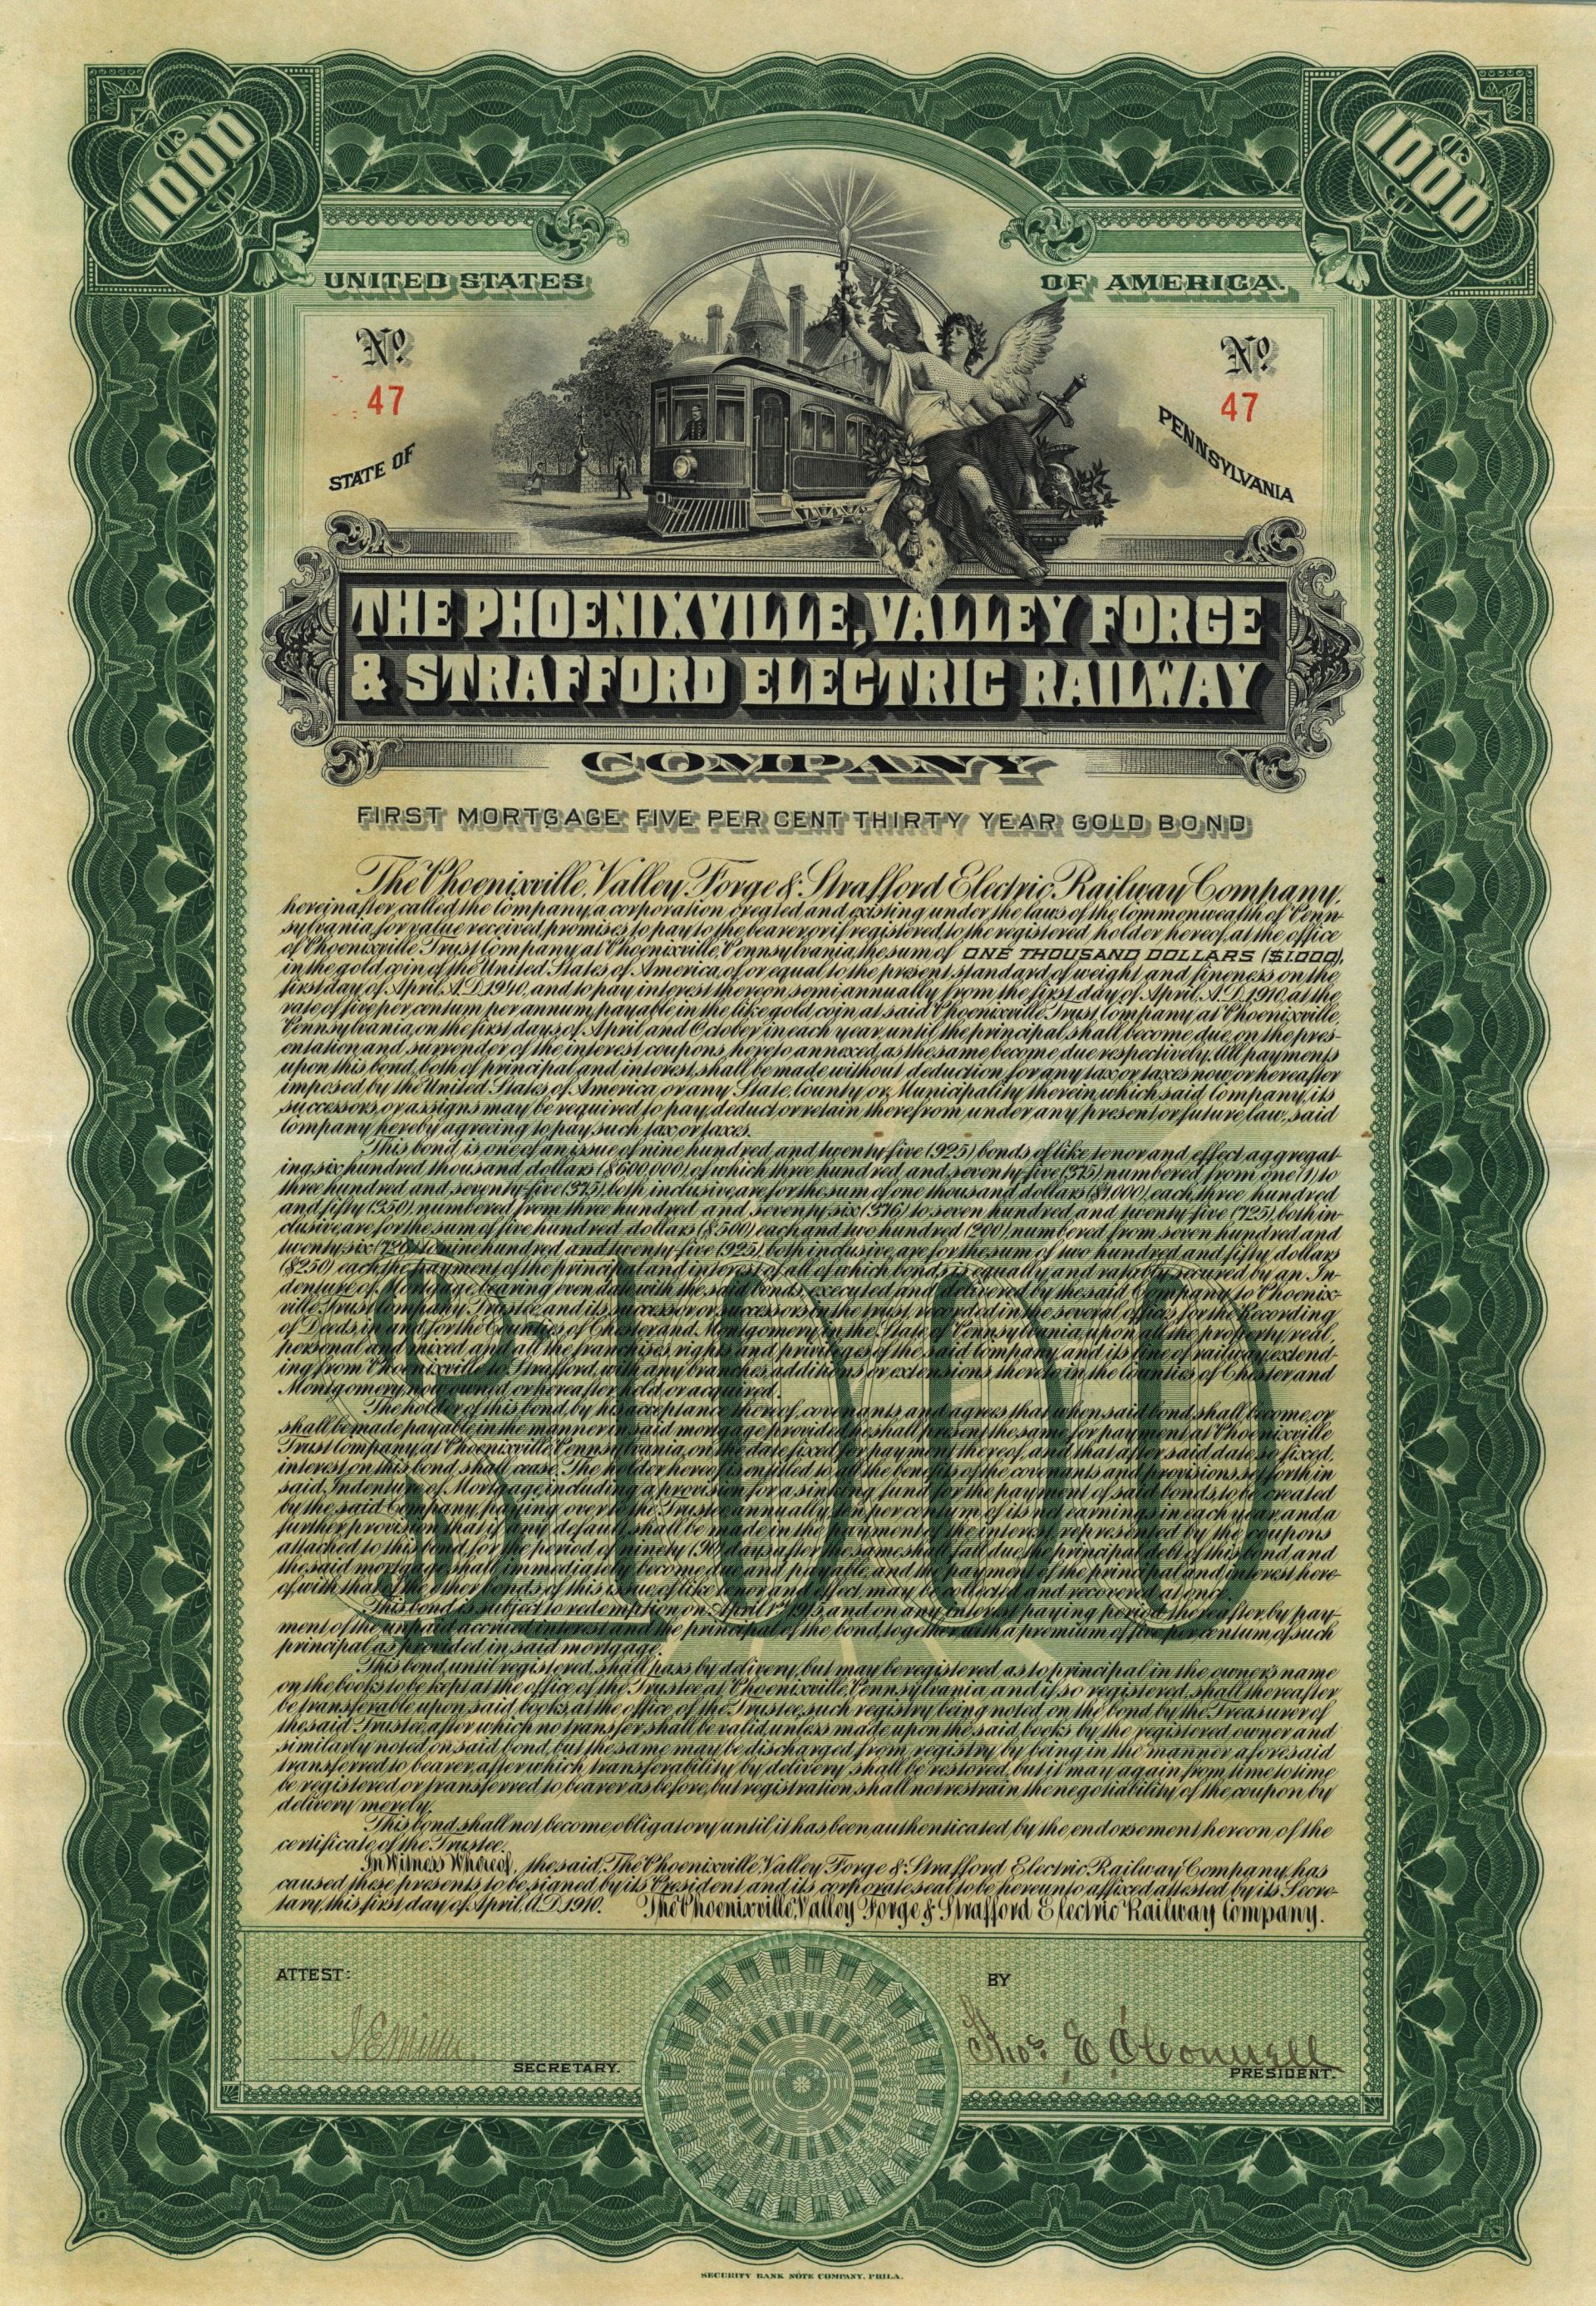 Phoenixville, Valley Forge and Strafford Electric Railway - Uncanceled Railroad Gold Bond